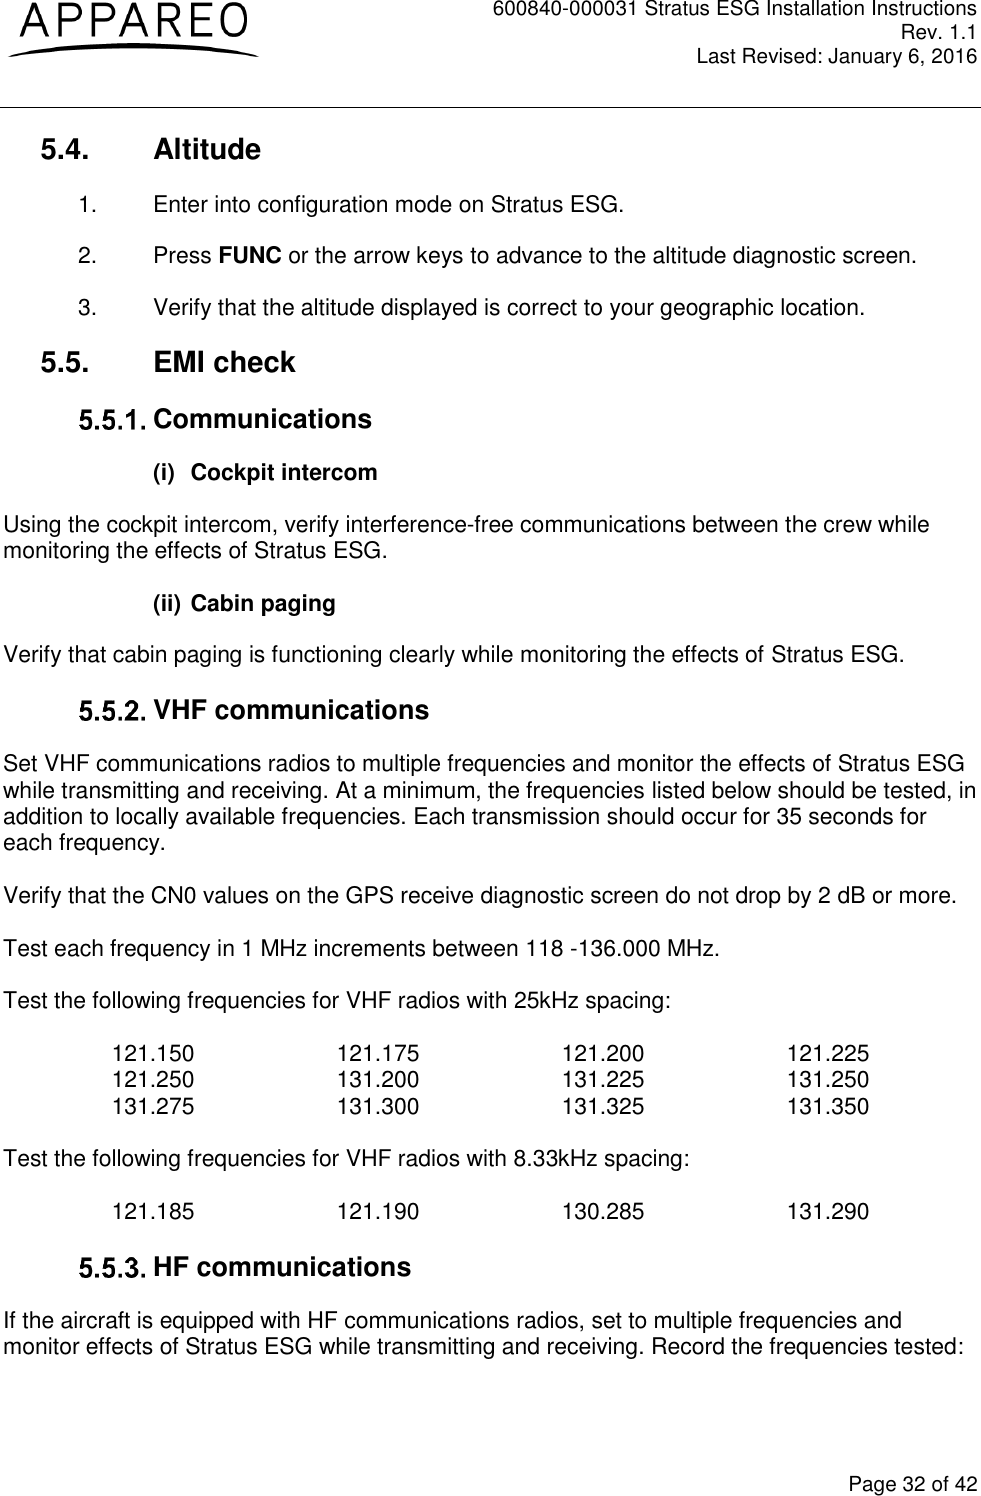 600840-000031 Stratus ESG Installation Instructions Rev. 1.1 Last Revised: January 6, 2016  Page 32 of 42 5.4.  Altitude 1.  Enter into configuration mode on Stratus ESG. 2.  Press FUNC or the arrow keys to advance to the altitude diagnostic screen. 3.  Verify that the altitude displayed is correct to your geographic location. 5.5.  EMI check  Communications (i)  Cockpit intercom Using the cockpit intercom, verify interference-free communications between the crew while monitoring the effects of Stratus ESG.  (ii) Cabin paging Verify that cabin paging is functioning clearly while monitoring the effects of Stratus ESG.   VHF communications Set VHF communications radios to multiple frequencies and monitor the effects of Stratus ESG while transmitting and receiving. At a minimum, the frequencies listed below should be tested, in addition to locally available frequencies. Each transmission should occur for 35 seconds for each frequency.   Verify that the CN0 values on the GPS receive diagnostic screen do not drop by 2 dB or more.     Test each frequency in 1 MHz increments between 118 -136.000 MHz.  Test the following frequencies for VHF radios with 25kHz spacing:  121.150    121.175    121.200    121.225 121.250    131.200    131.225    131.250 131.275    131.300    131.325    131.350  Test the following frequencies for VHF radios with 8.33kHz spacing:  121.185    121.190    130.285    131.290   HF communications If the aircraft is equipped with HF communications radios, set to multiple frequencies and monitor effects of Stratus ESG while transmitting and receiving. Record the frequencies tested:  